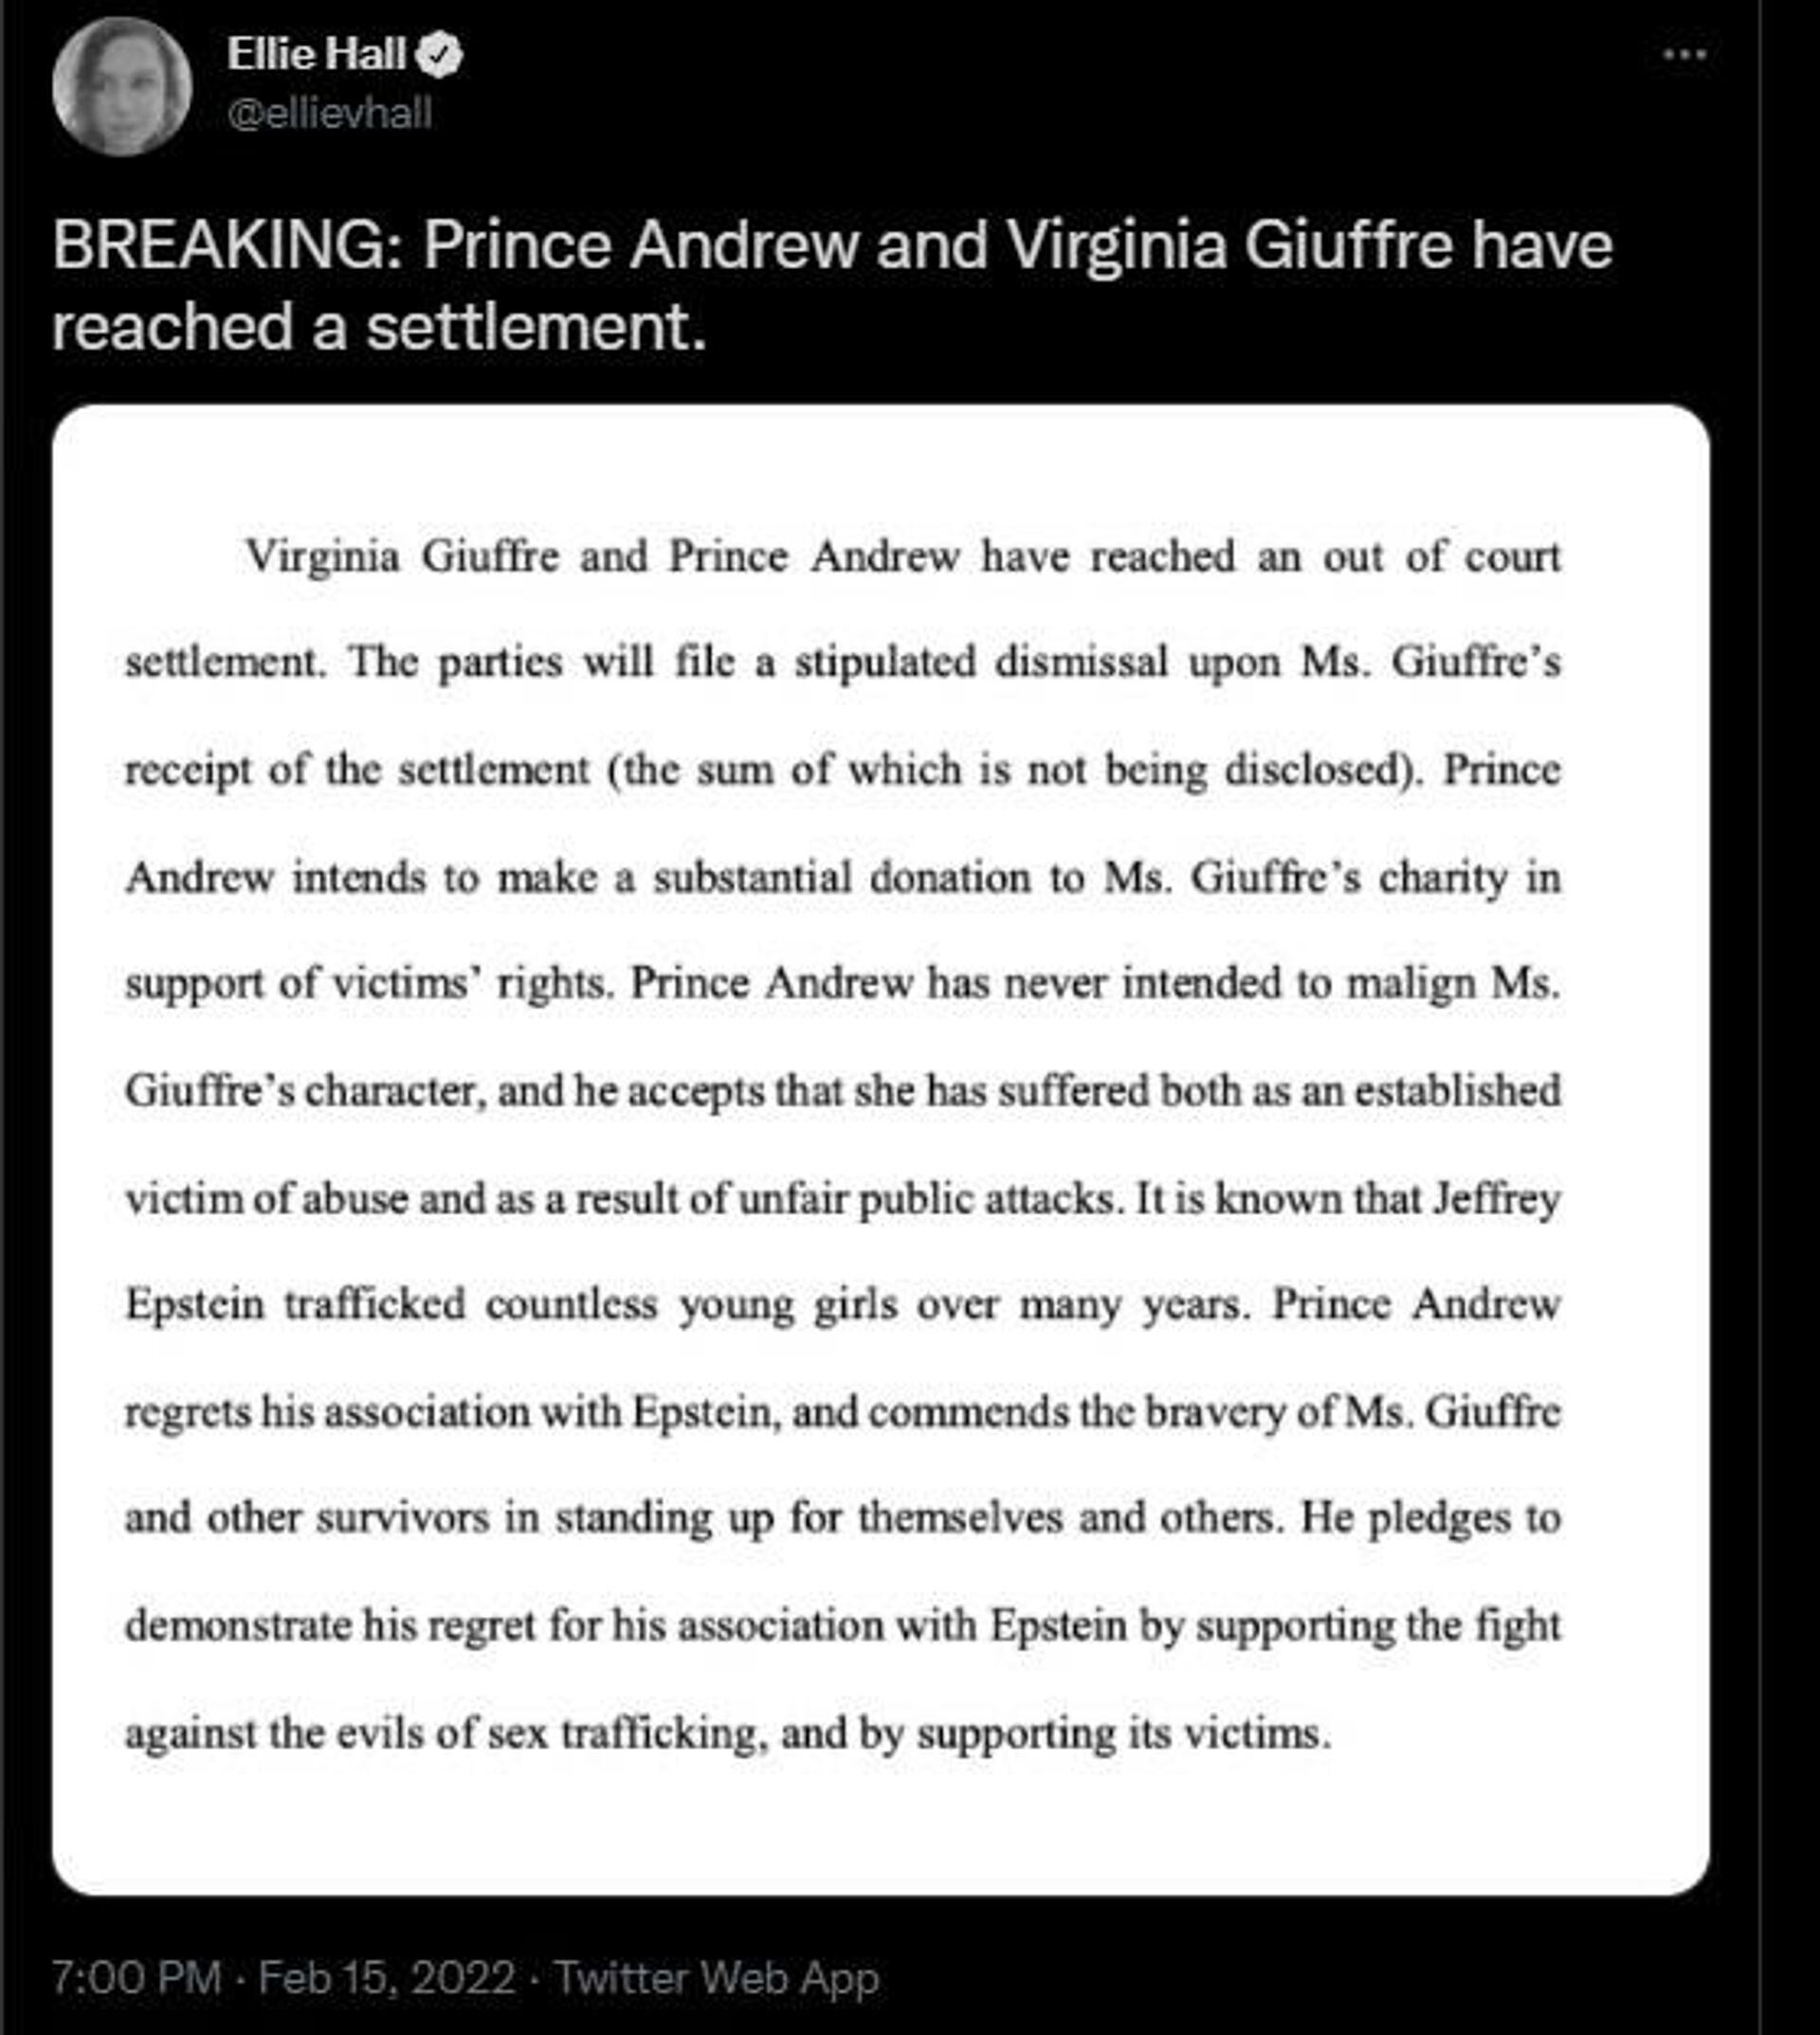 A tweet containing the text of the statement by Prince Andrew and Virginia Giuffre's lawyers regarding reachign a settlement. - Sputnik International, 1920, 15.02.2022